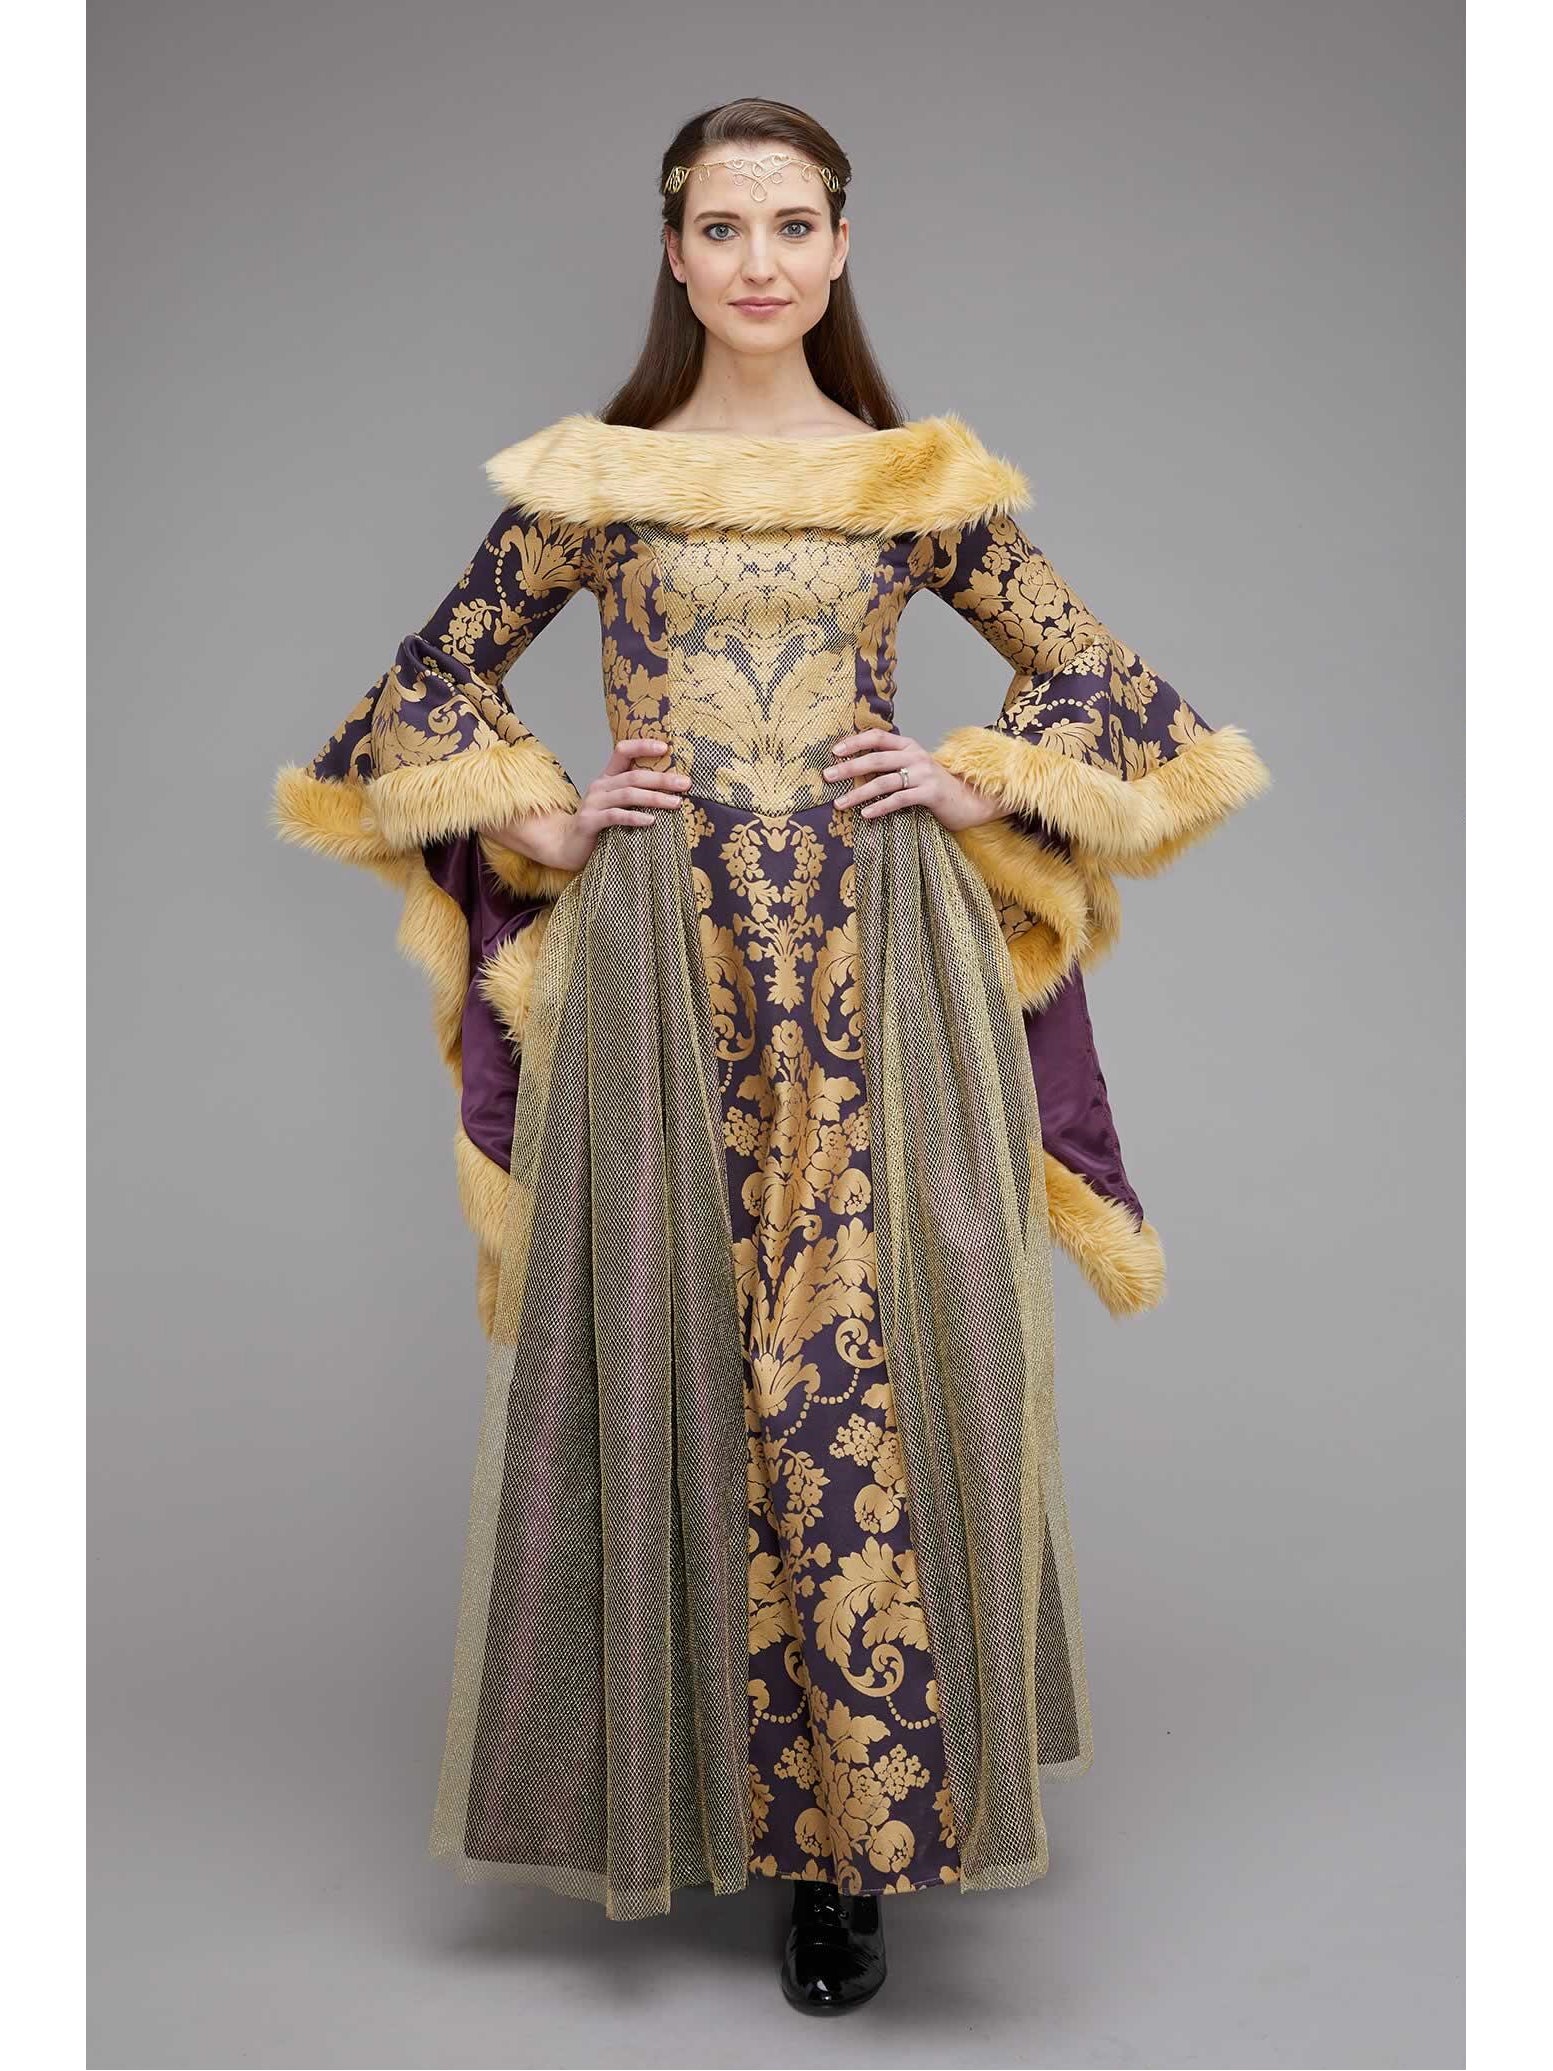 Medieval Queen Costume For Women Chasing Fireflies